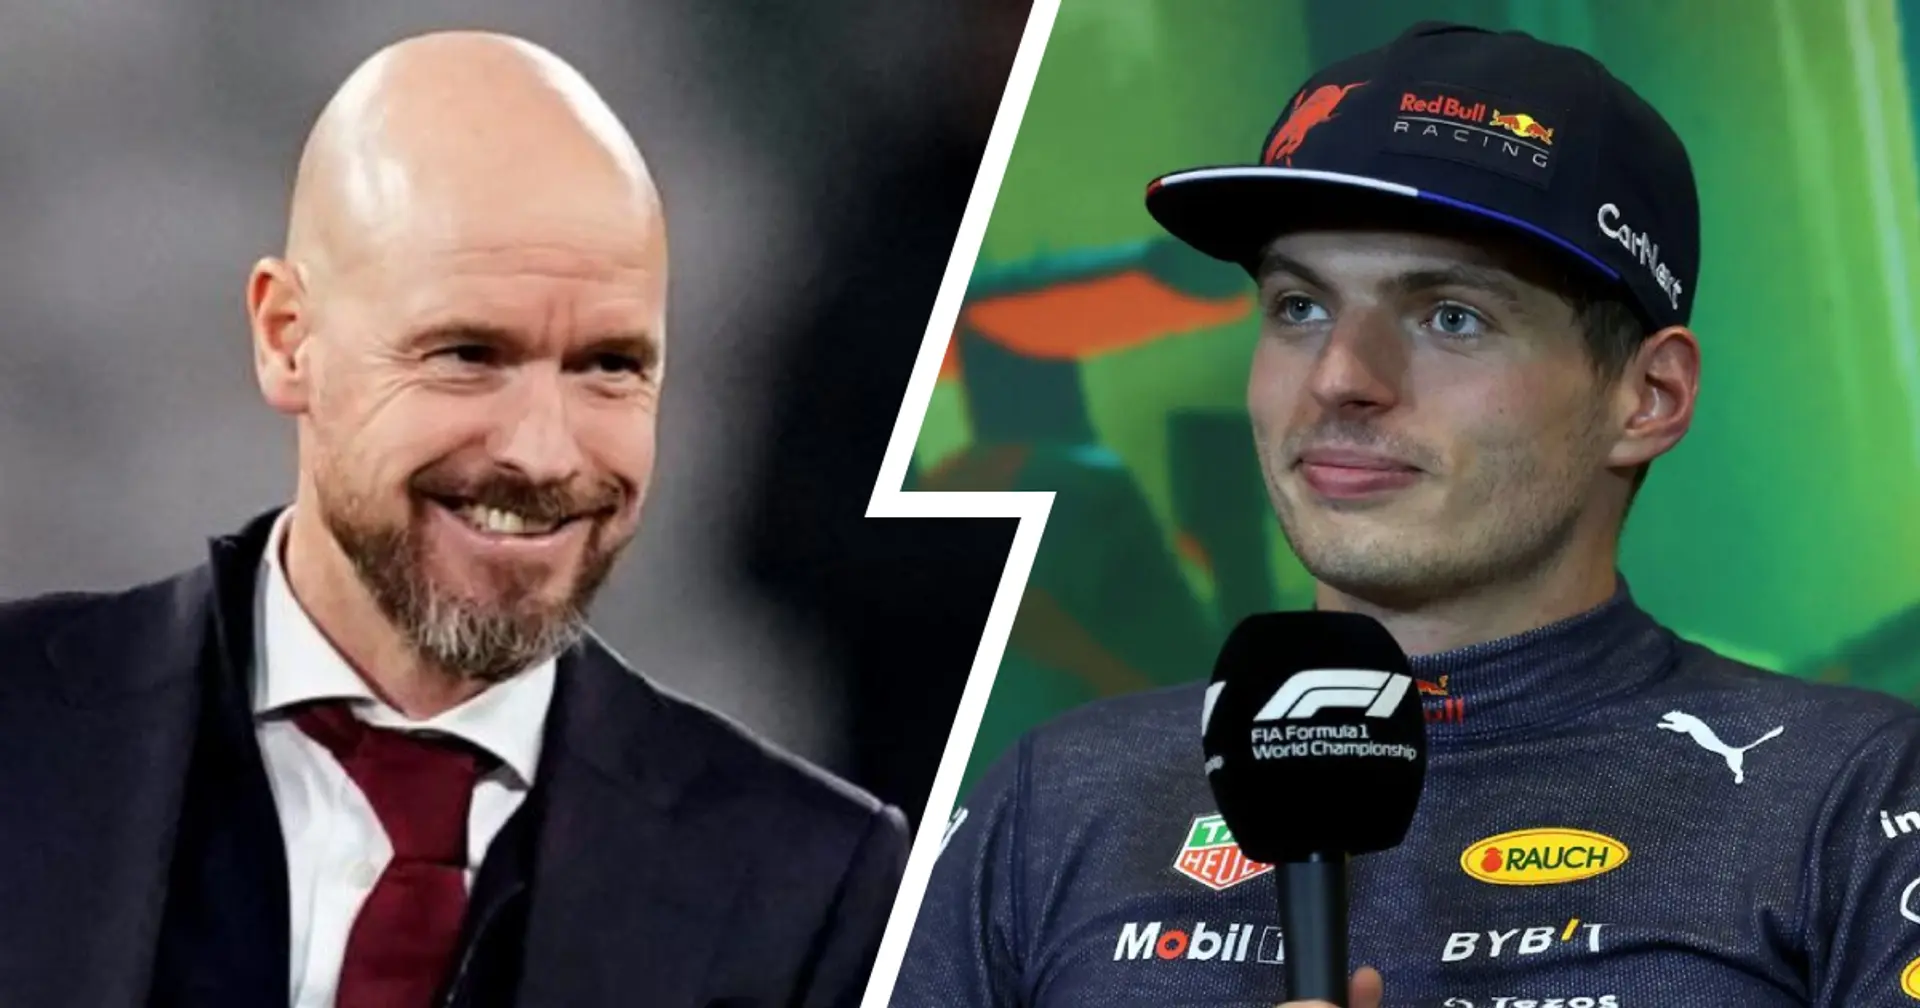 'He can handle the pressure': Formula 1 champion Max Verstappen backs Ten Hag to succeed at Man United